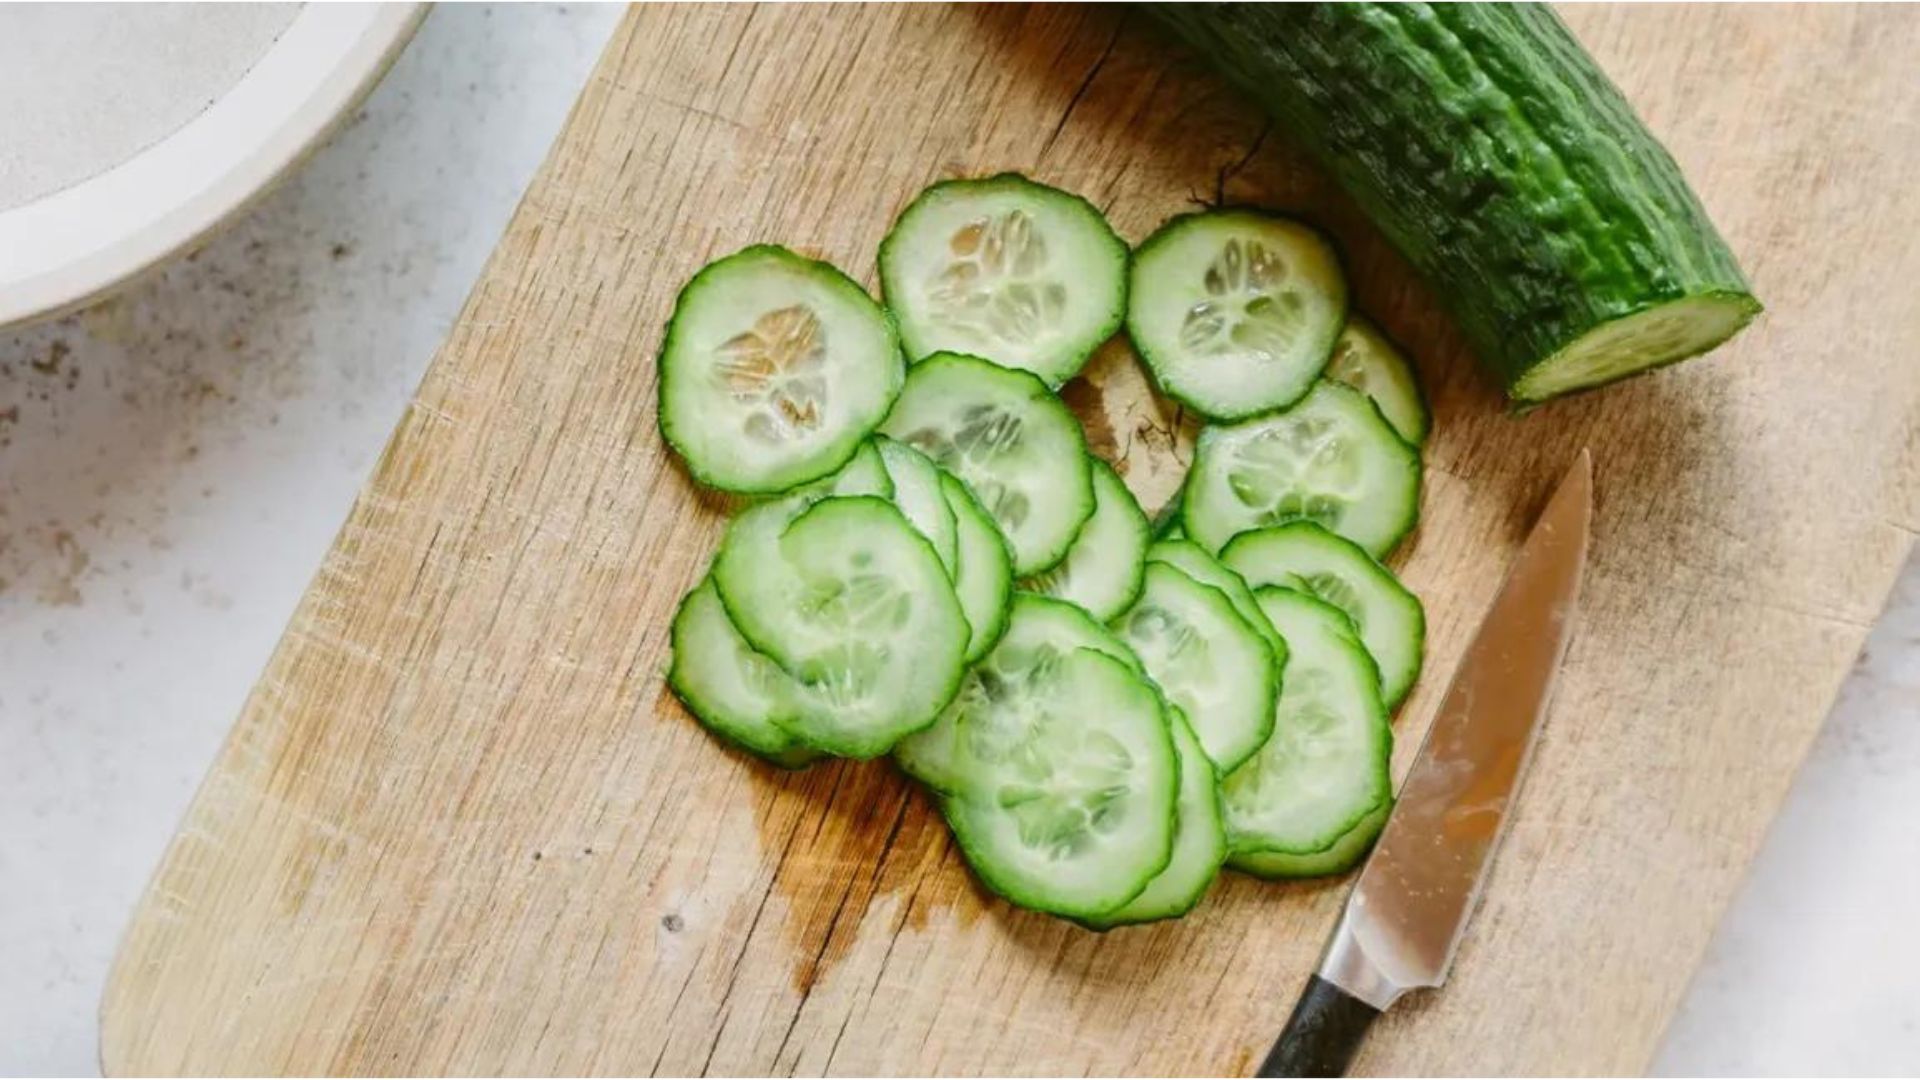 What to Make With Cucumbers